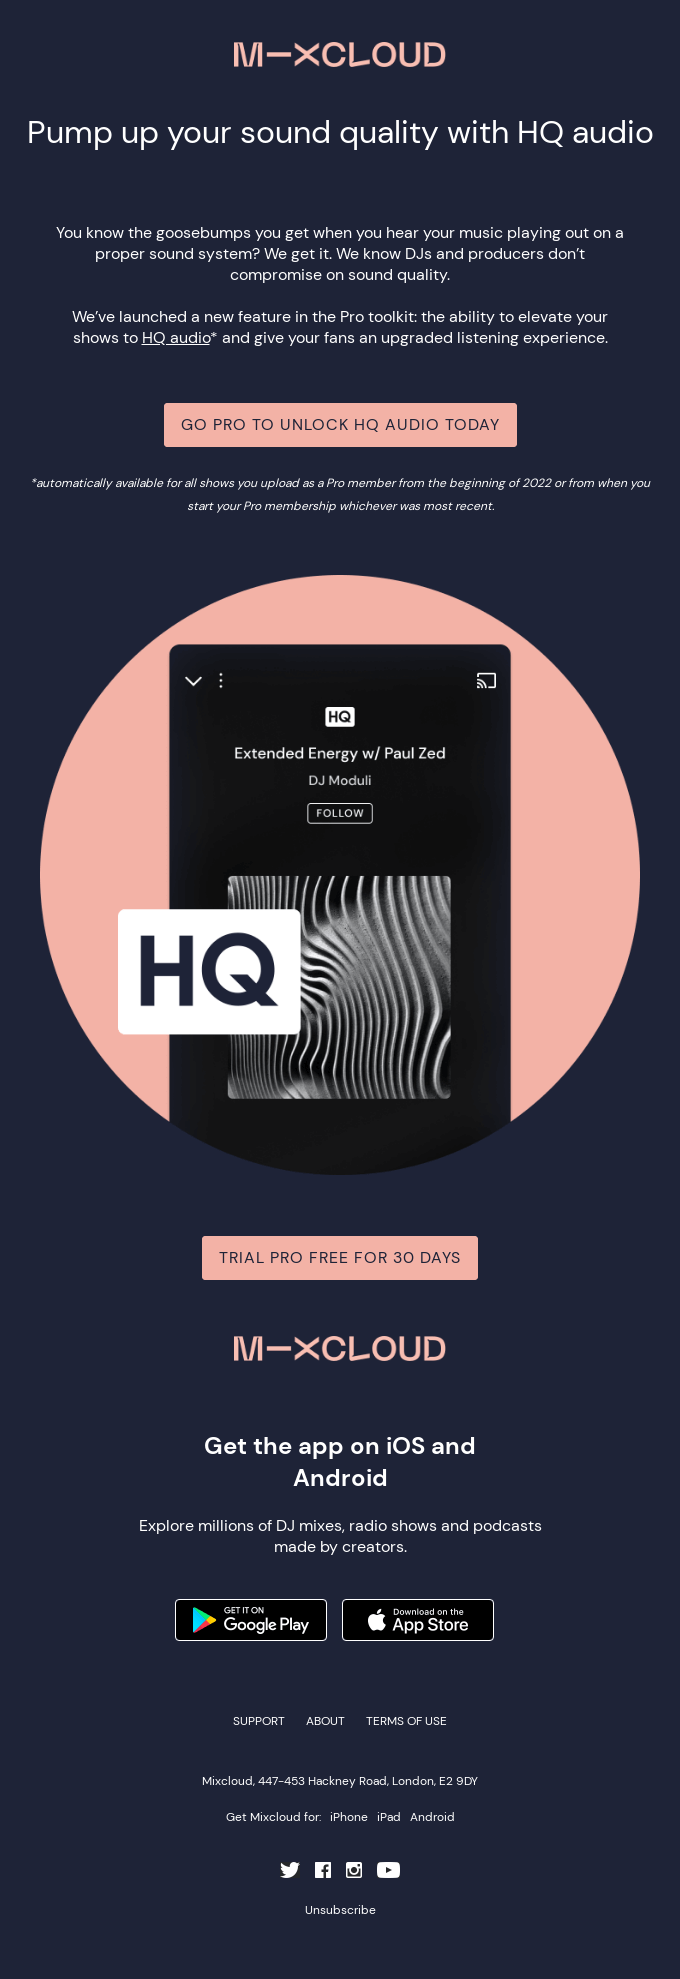 🔊 Pump up your sound quality with HQ audio - Trial Pro free for 30 days 🔊